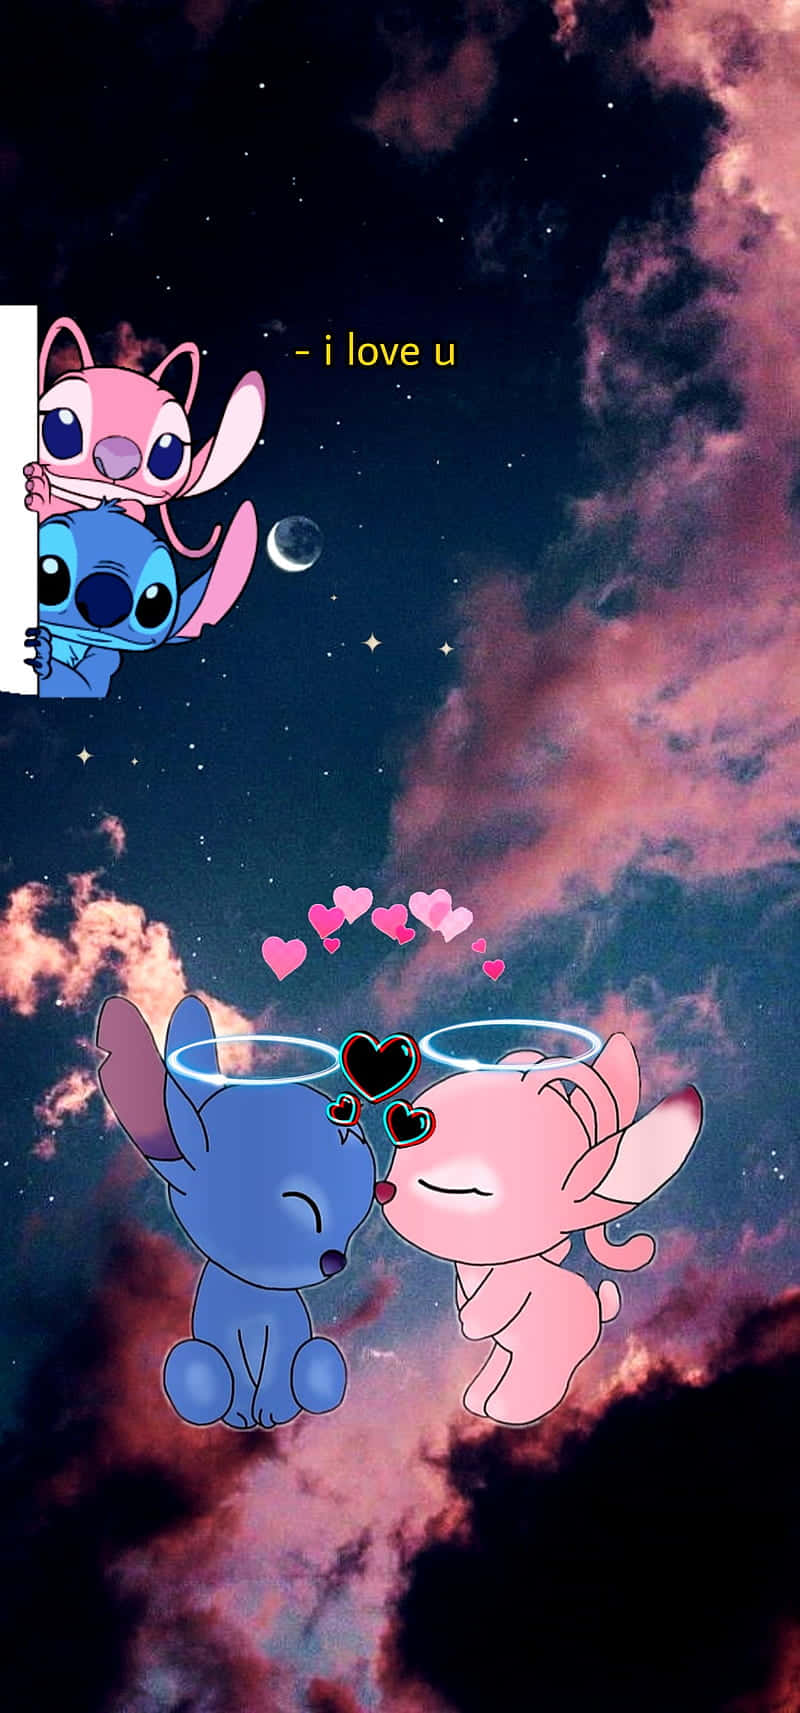 Cute Stitch And Angel Love Poster Wallpaper